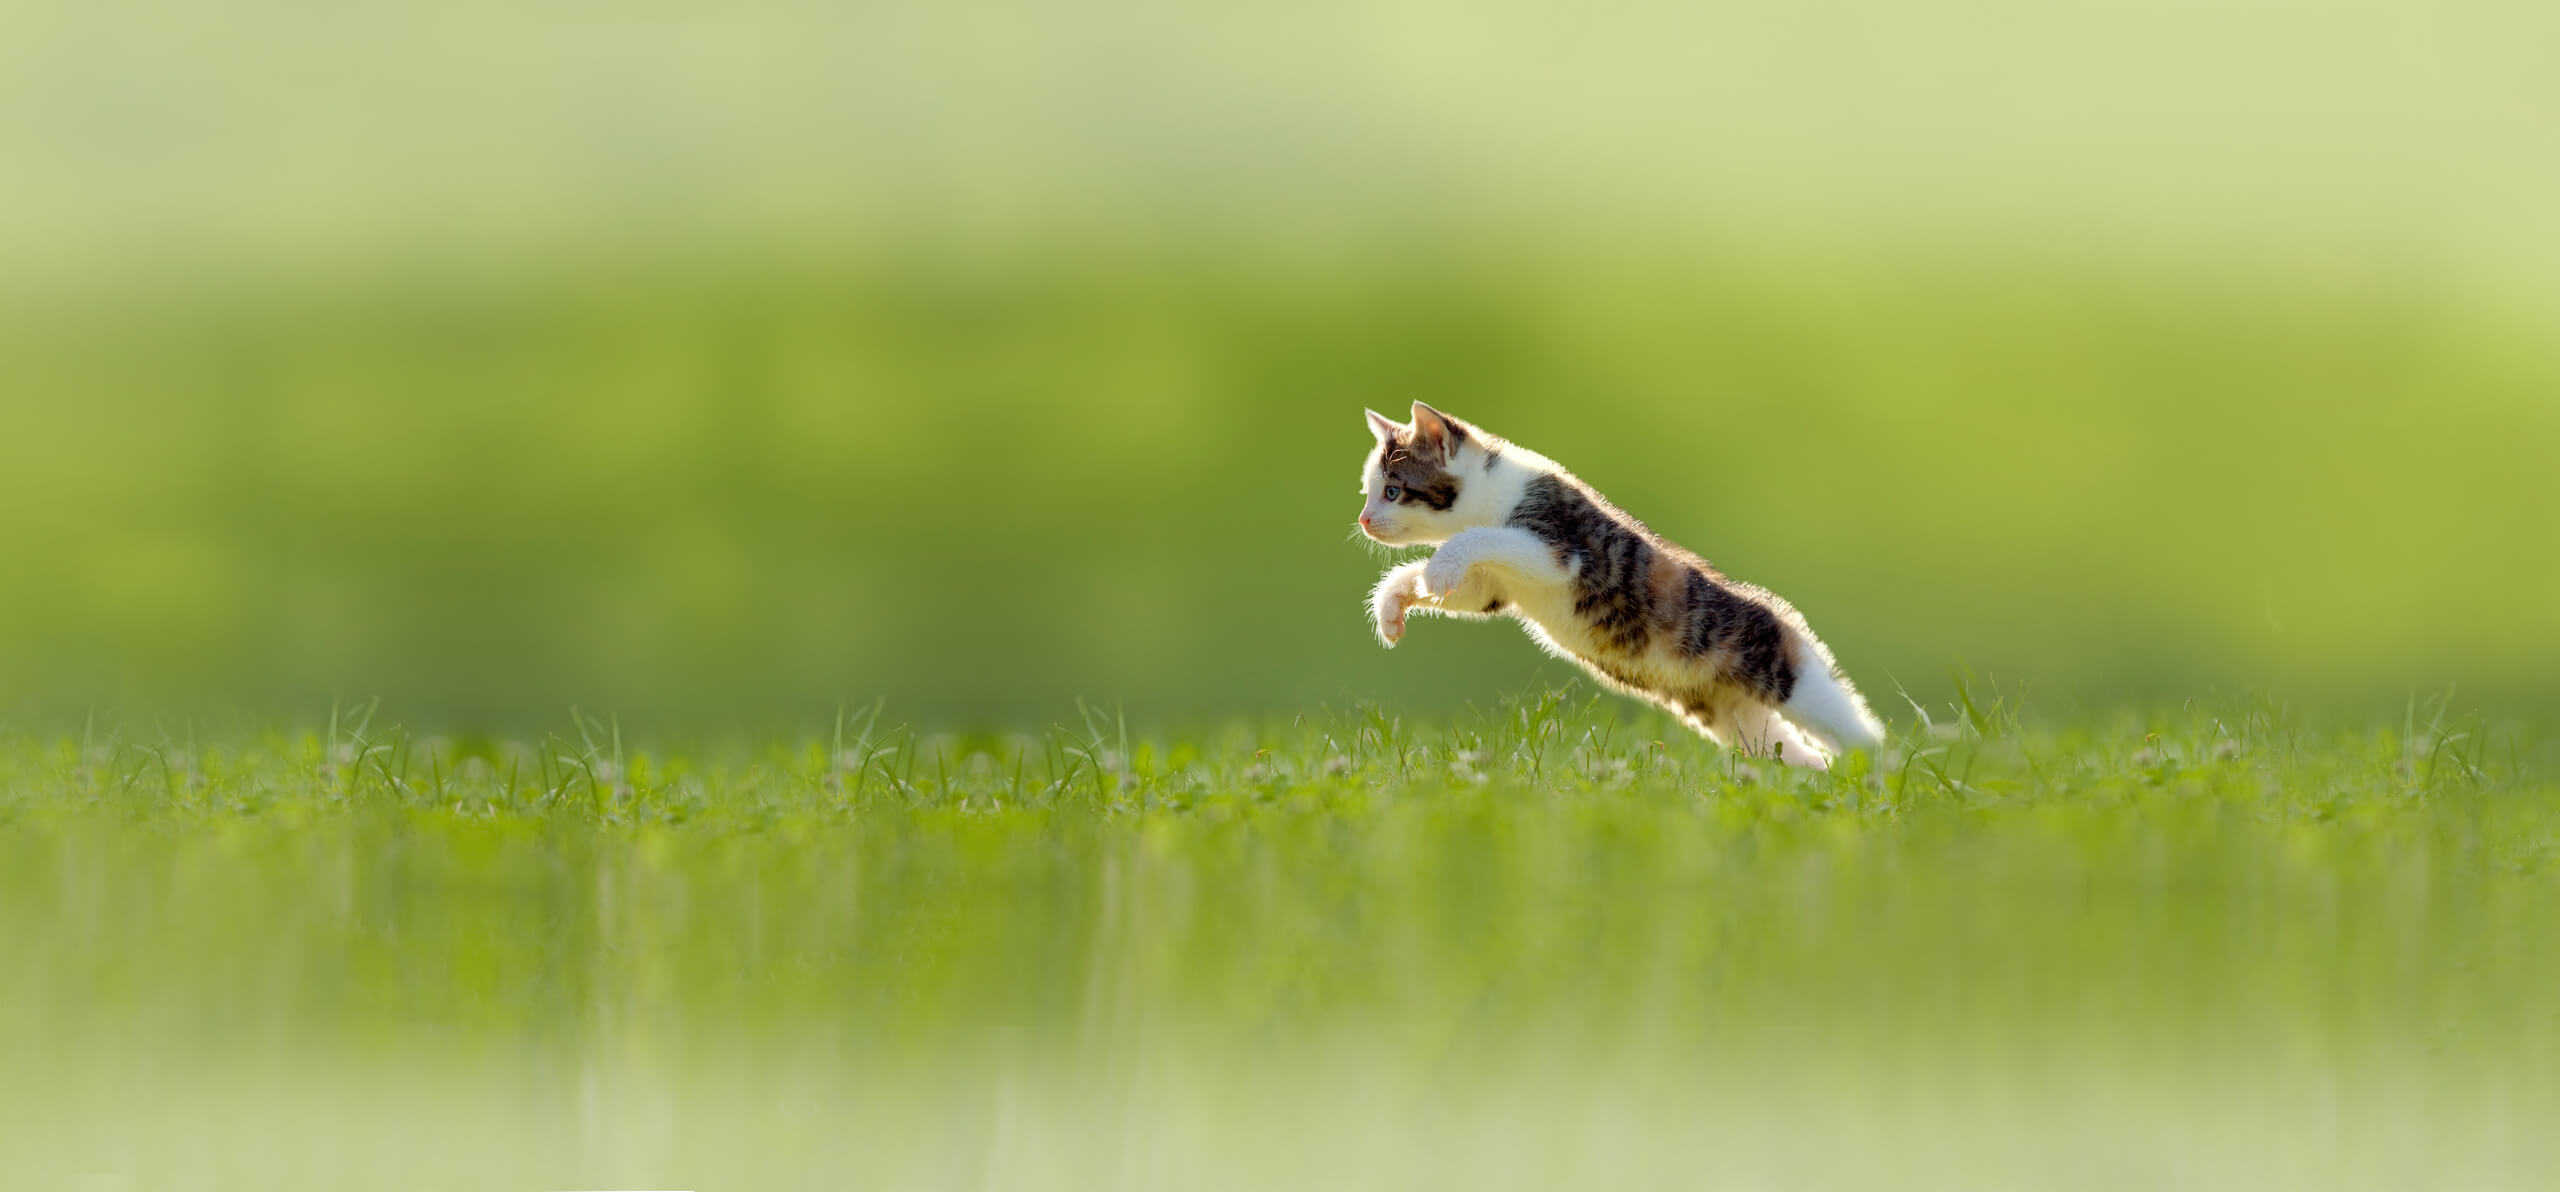 cat jumping in grass